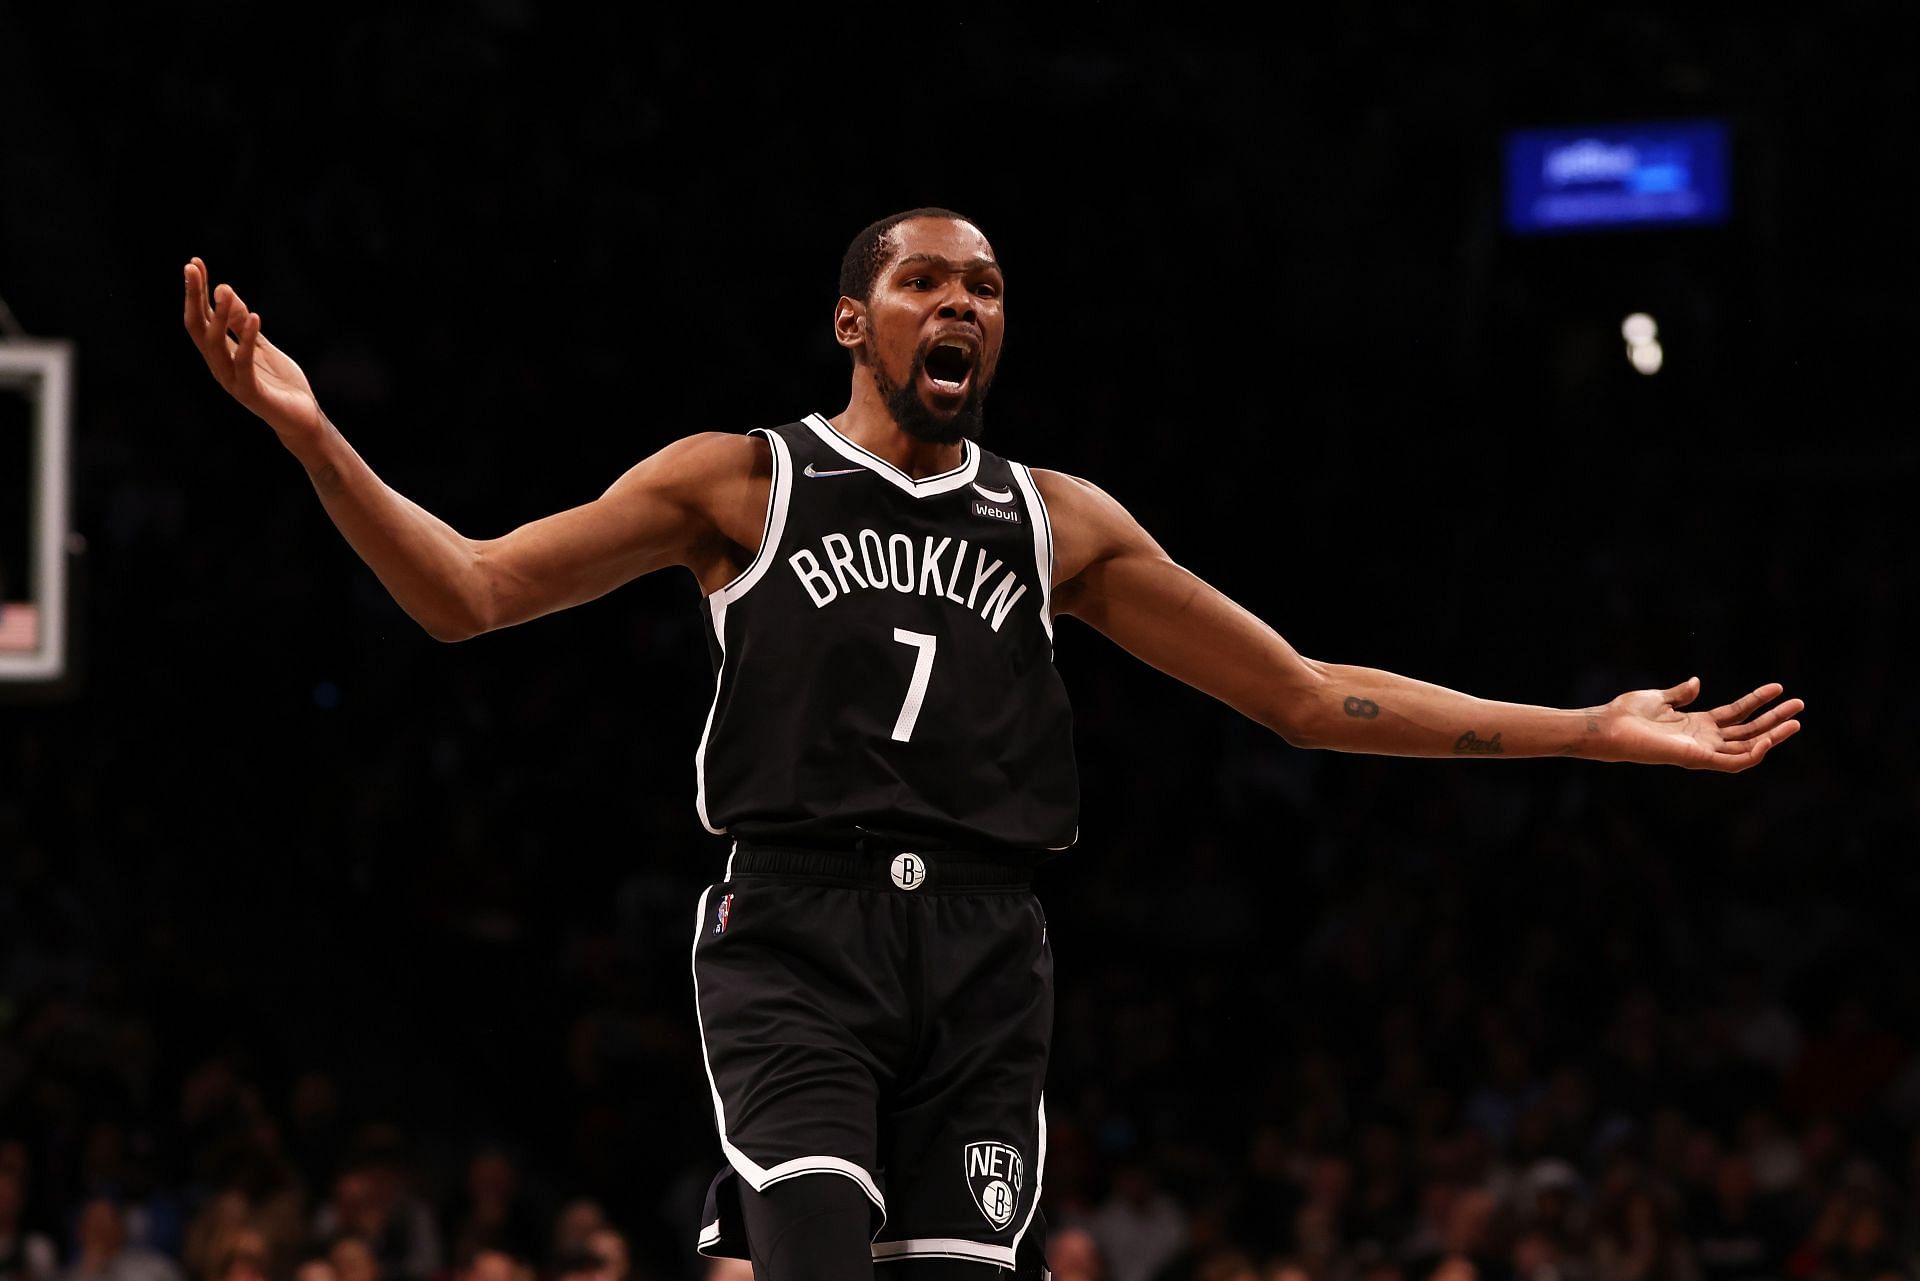 Kevin Durant reacts to a play during the Brooklyn Nets game